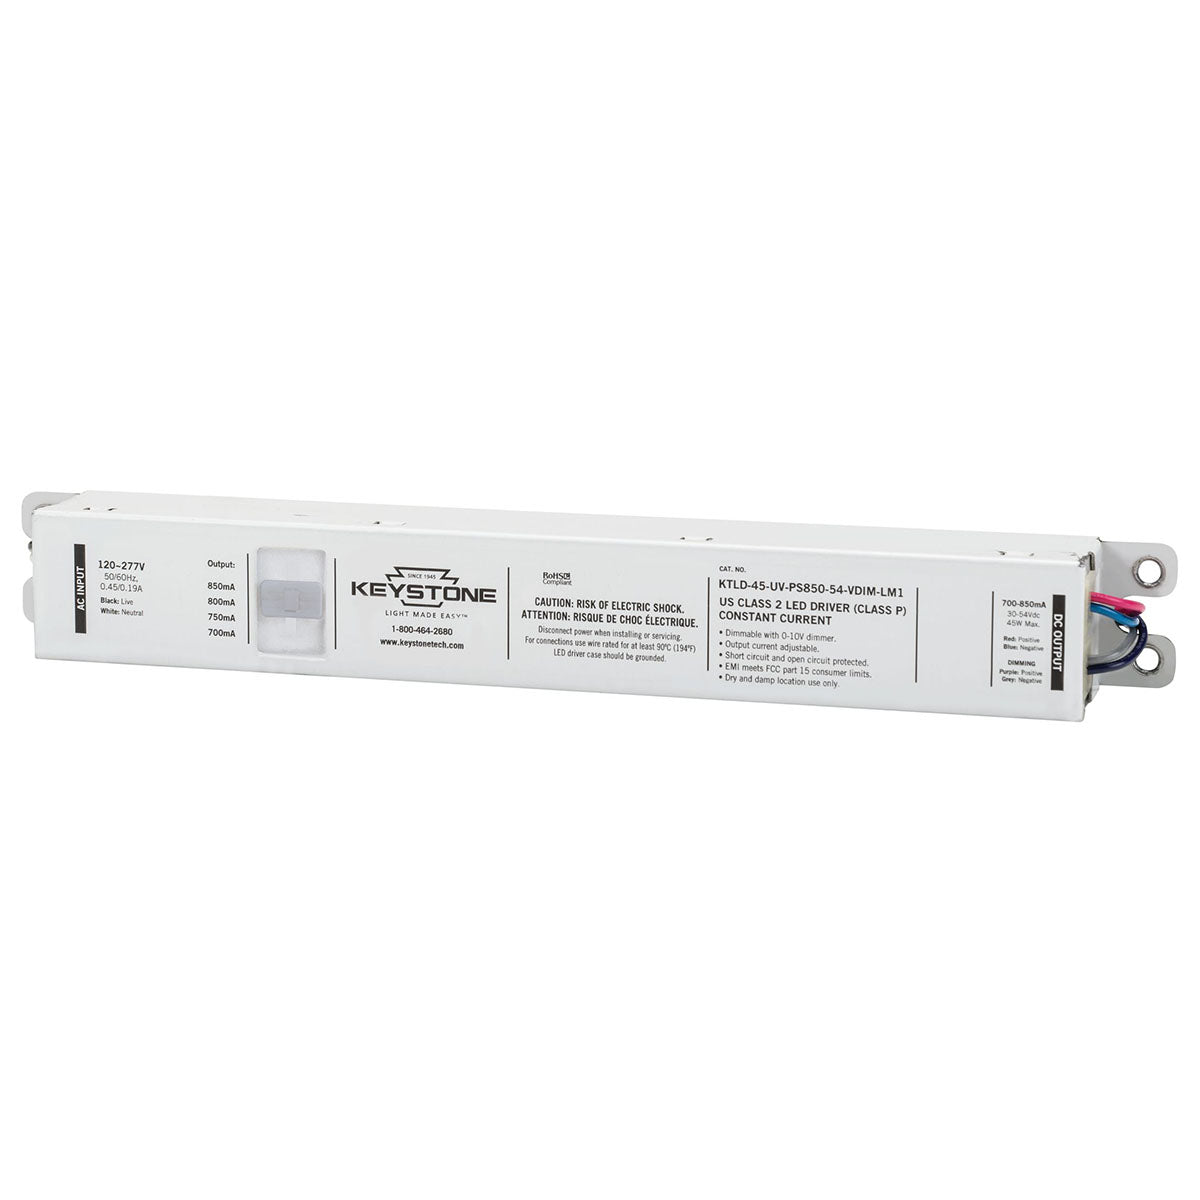 Power Select LED Driver, 45W, Adjustable Constant Current 700-850mA, 0-10V Dimming, 120-277V Input